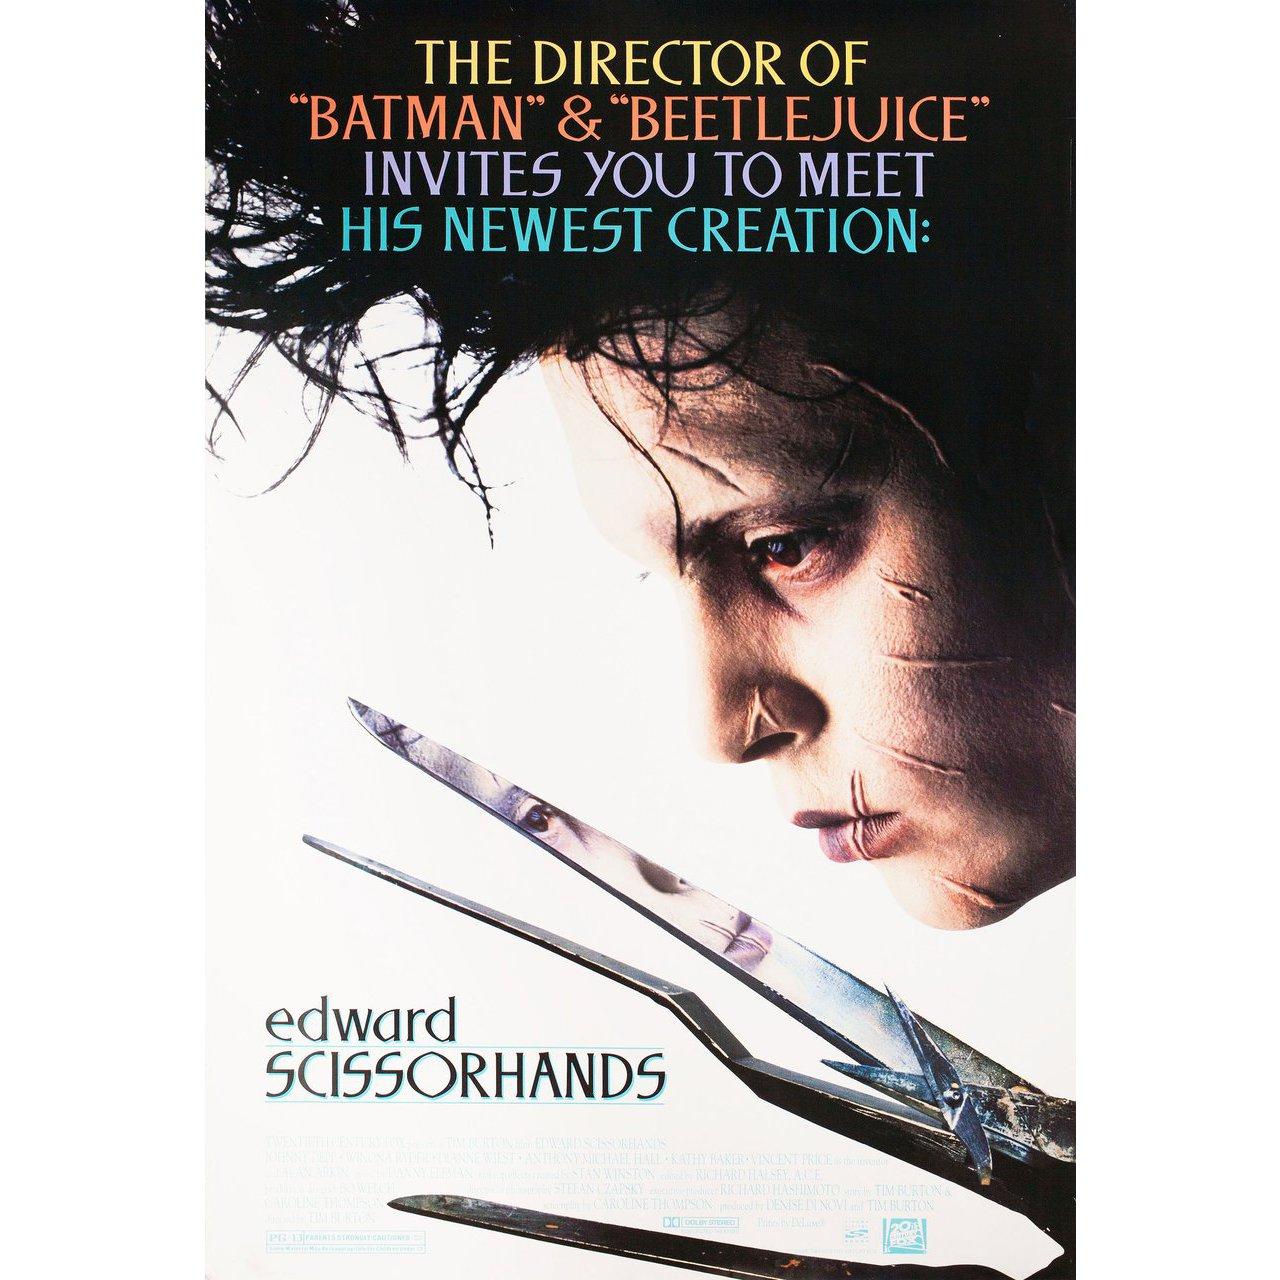 Original 1990 U.S. one sheet poster for the film 'Edward Scissorhands' directed by Tim Burton with Johnny Depp / Winona Ryder / Dianne Wiest / Anthony Michael Hall. Very good-fine condition, rolled. Please note: the size is stated in inches and the